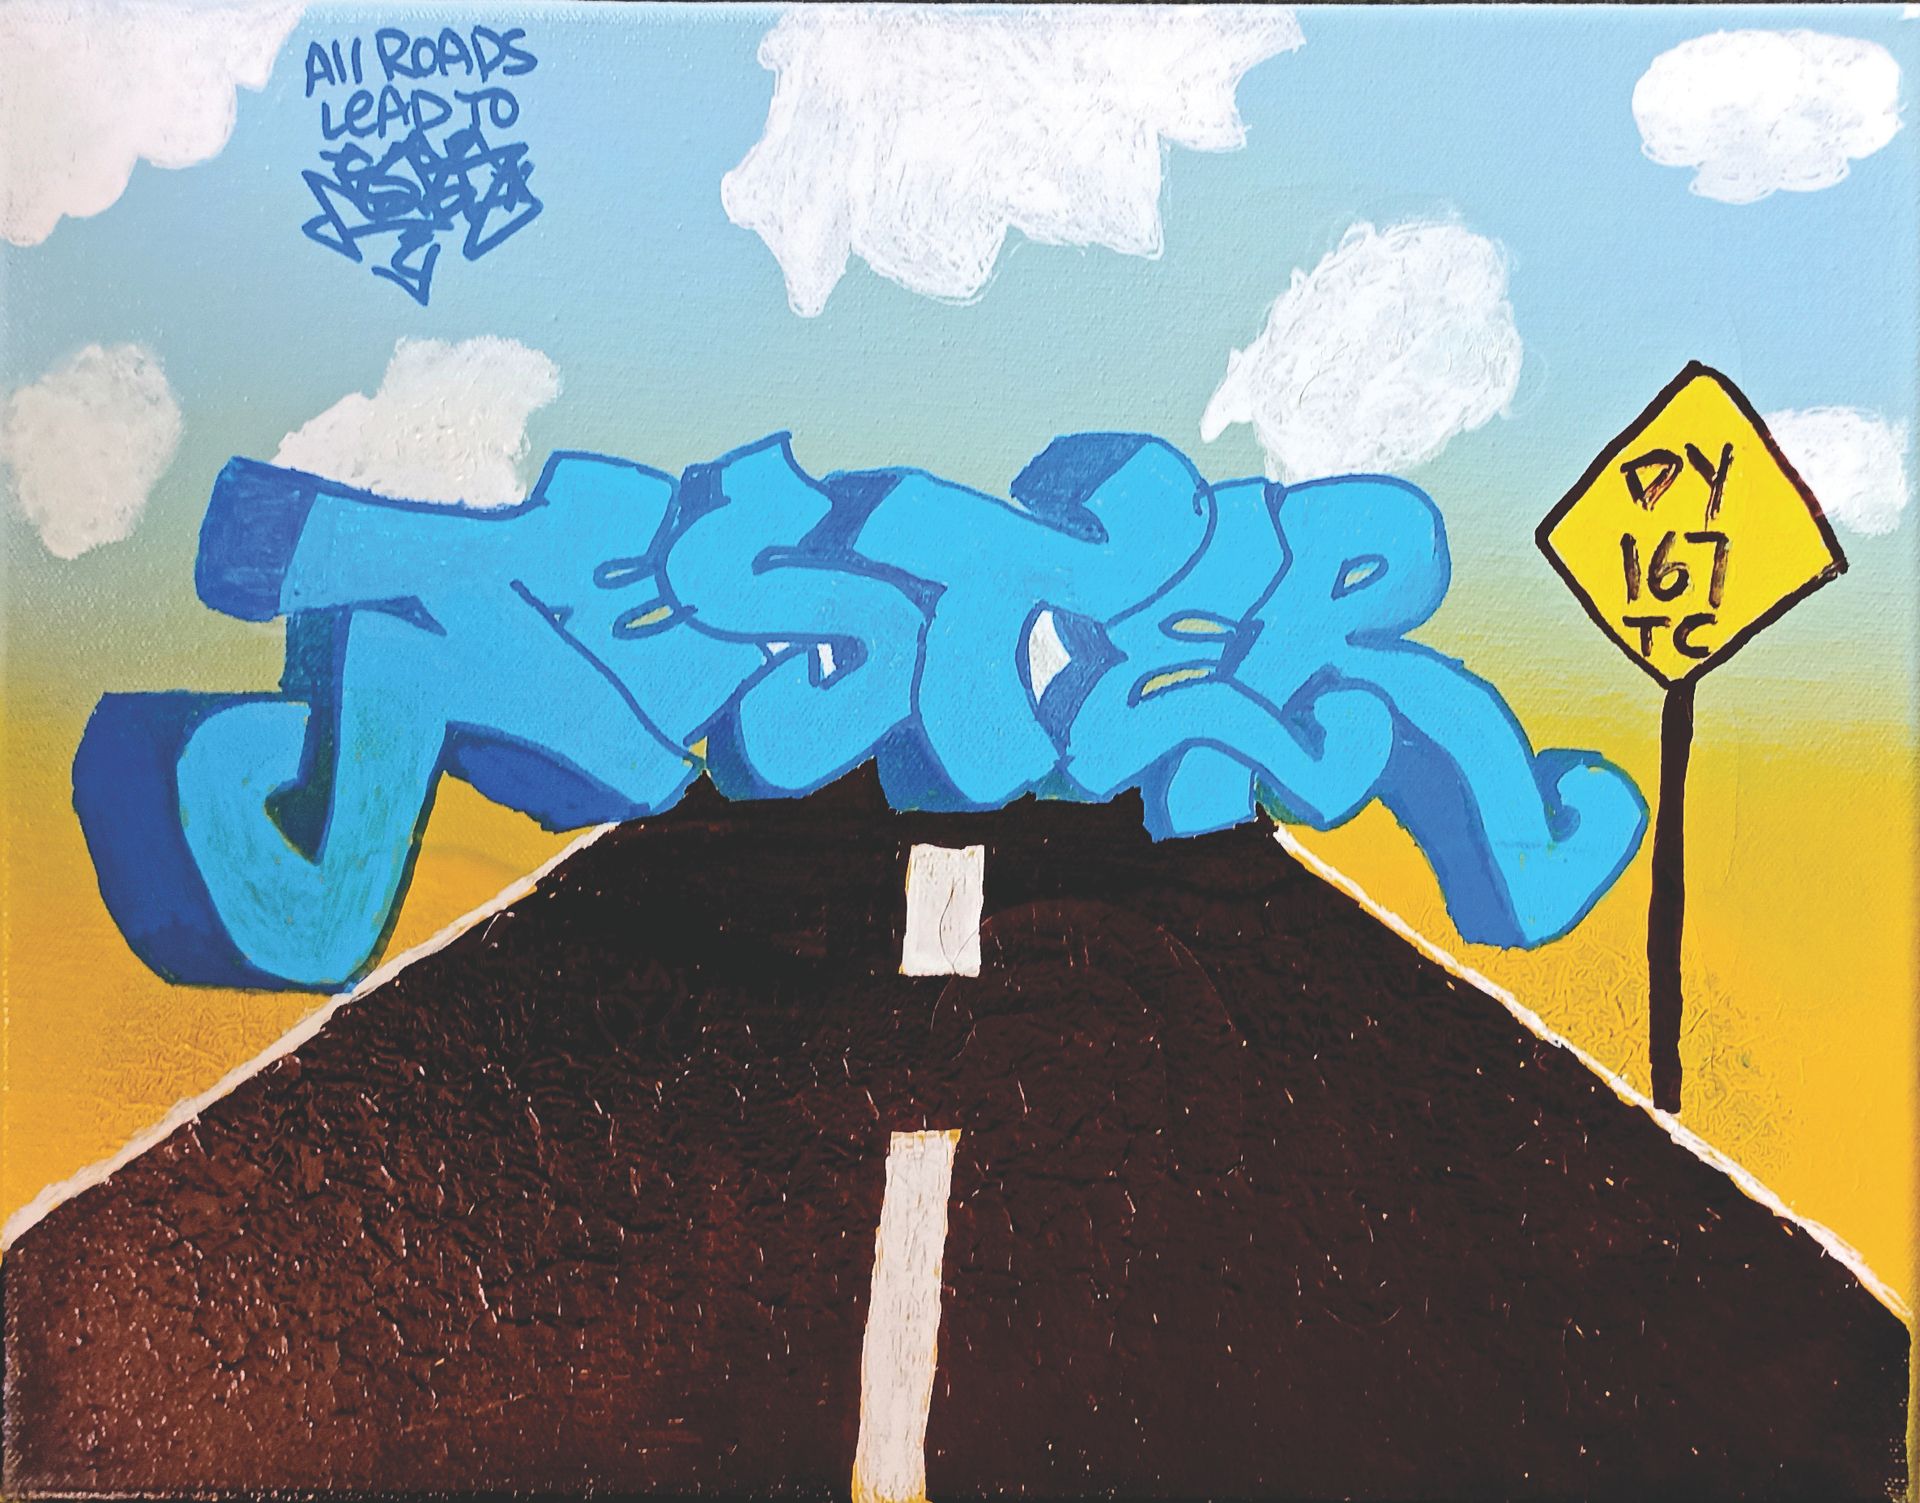 Null JESTER aka DY167 (XXth)

All roads lead to Jester

Mixed media on canvas

S&hellip;